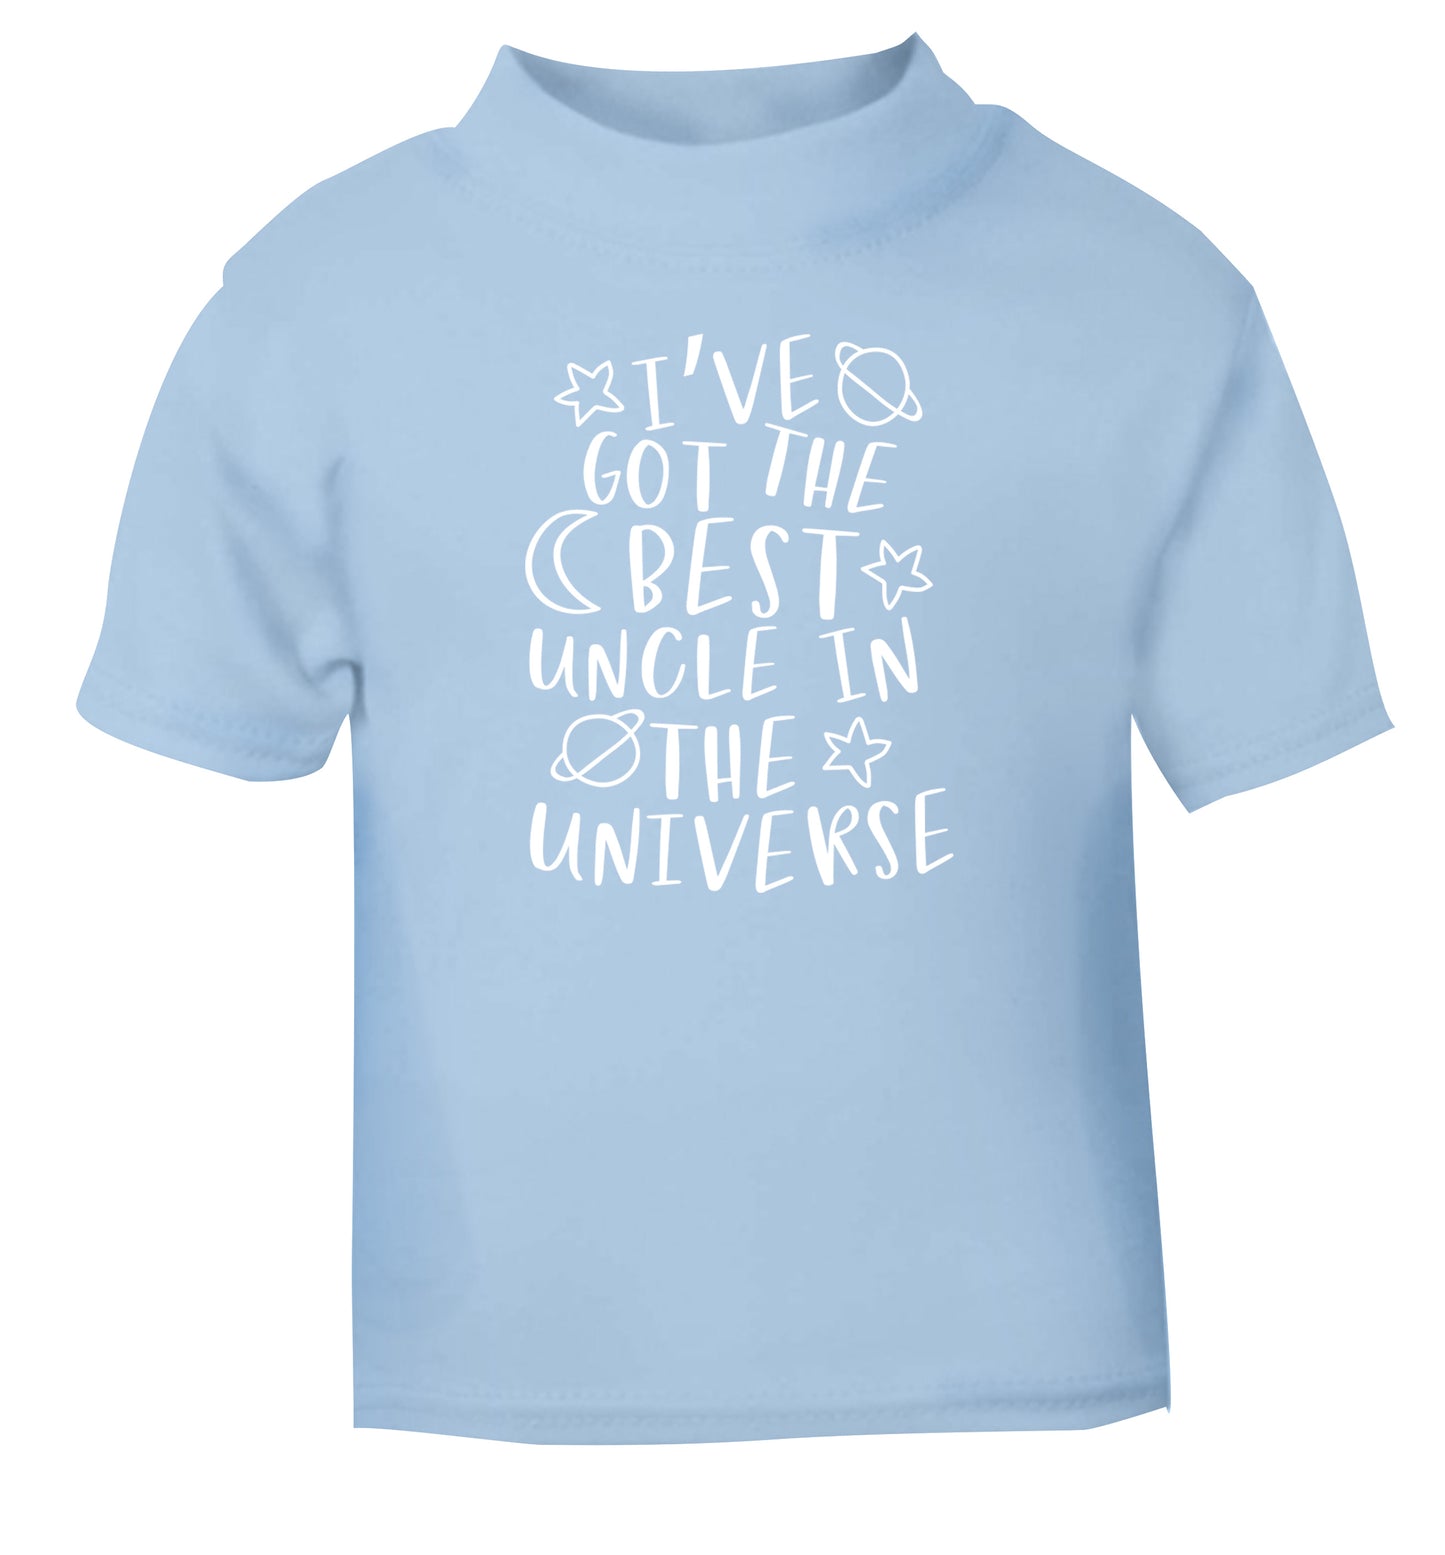 I've got the best uncle in the universe light blue Baby Toddler Tshirt 2 Years